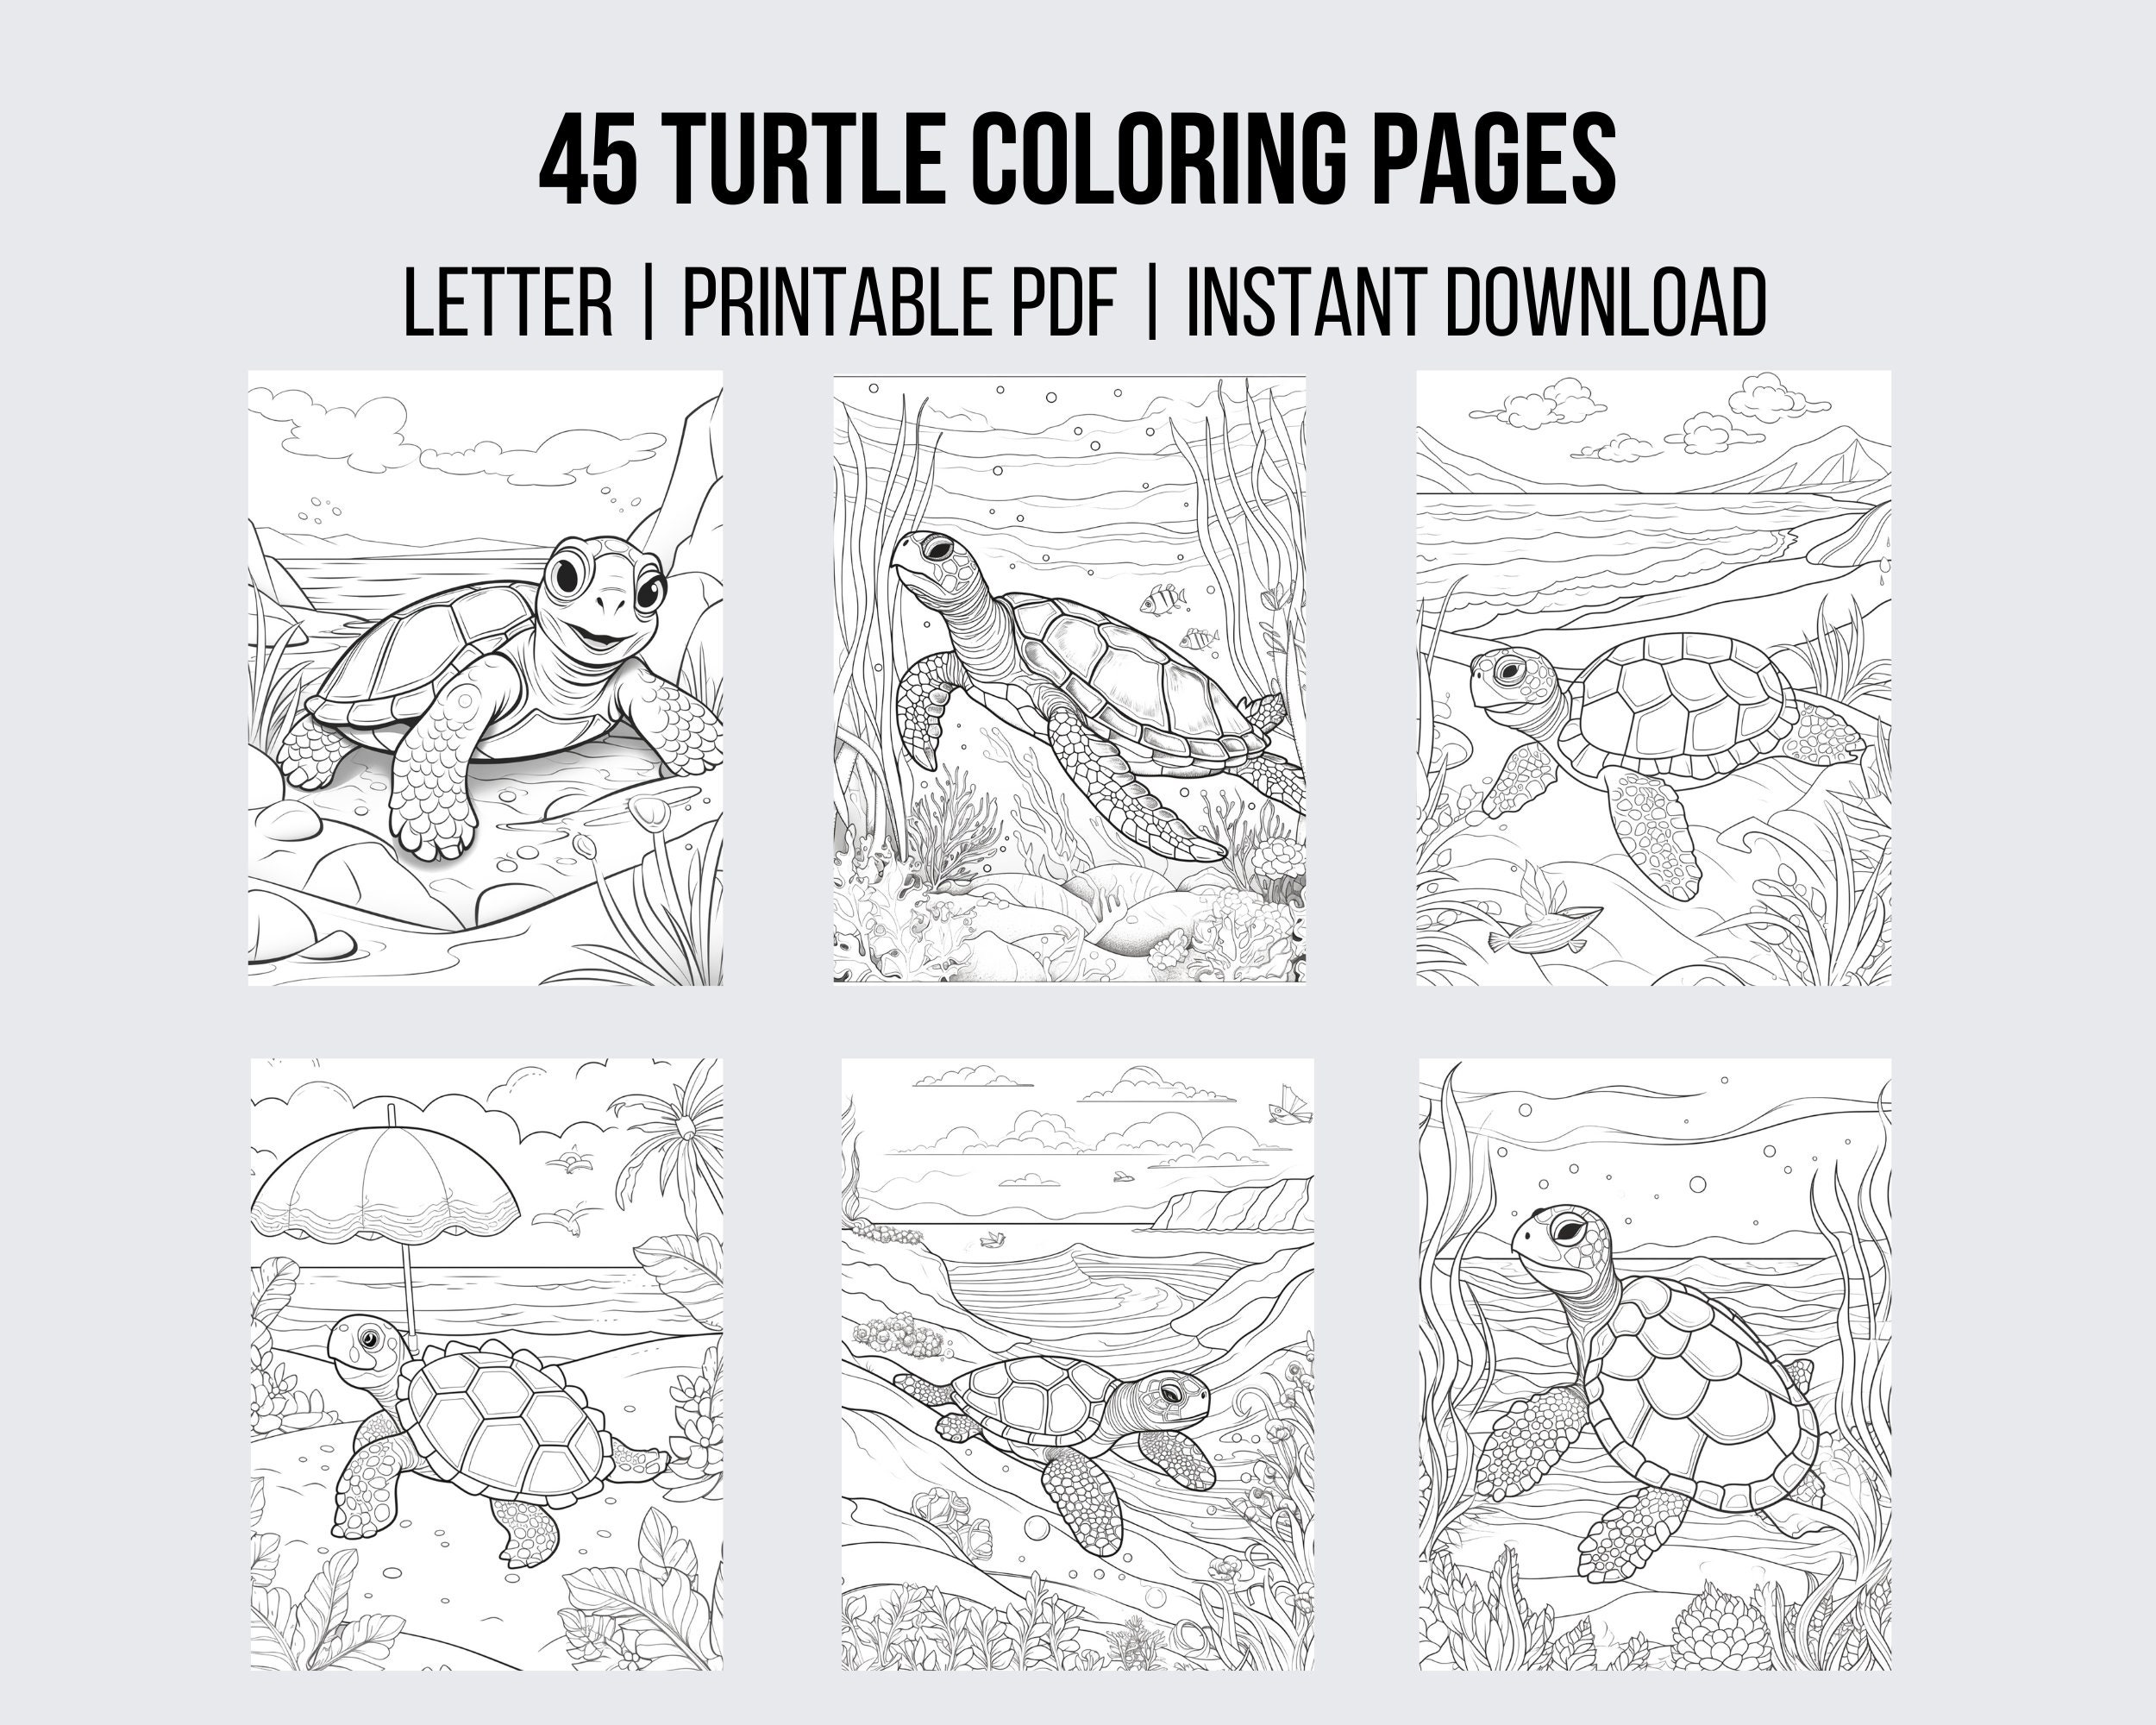 Turtle Coloring Page -  Sweden